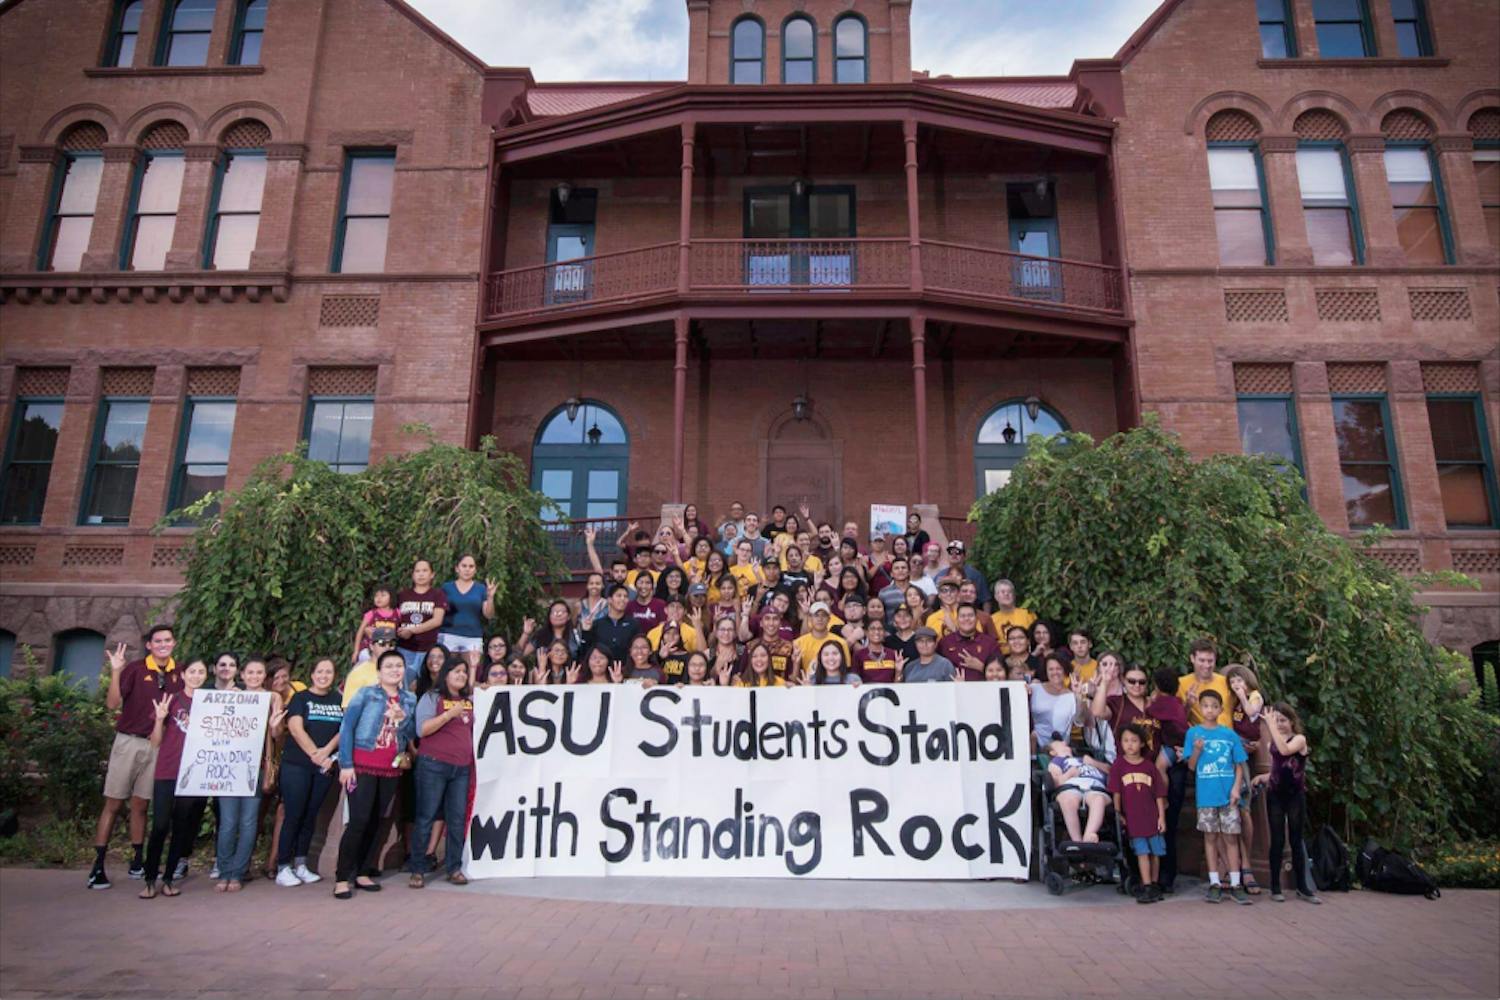 Students at ASU pose for a&nbsp;group picture to show support for Standing Rock on Oct. 30, 2016.